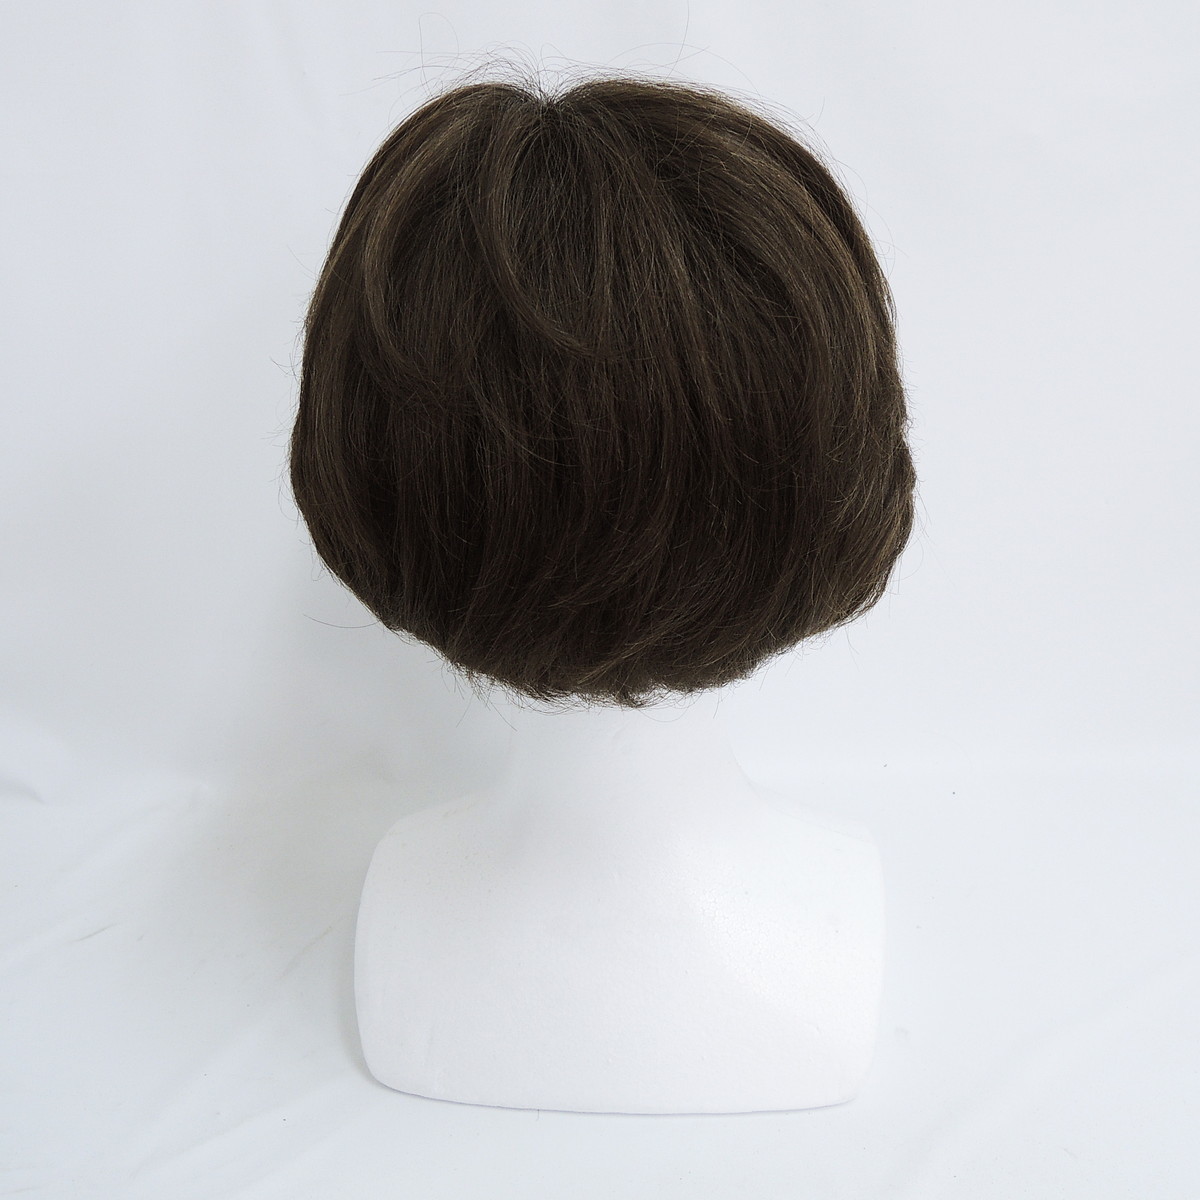  fontaine VP100 AR642 full wig for women wig person wool acrylic fiber series FONTAINE VALAN PREMIUM lady's new goods reference price \\275,000